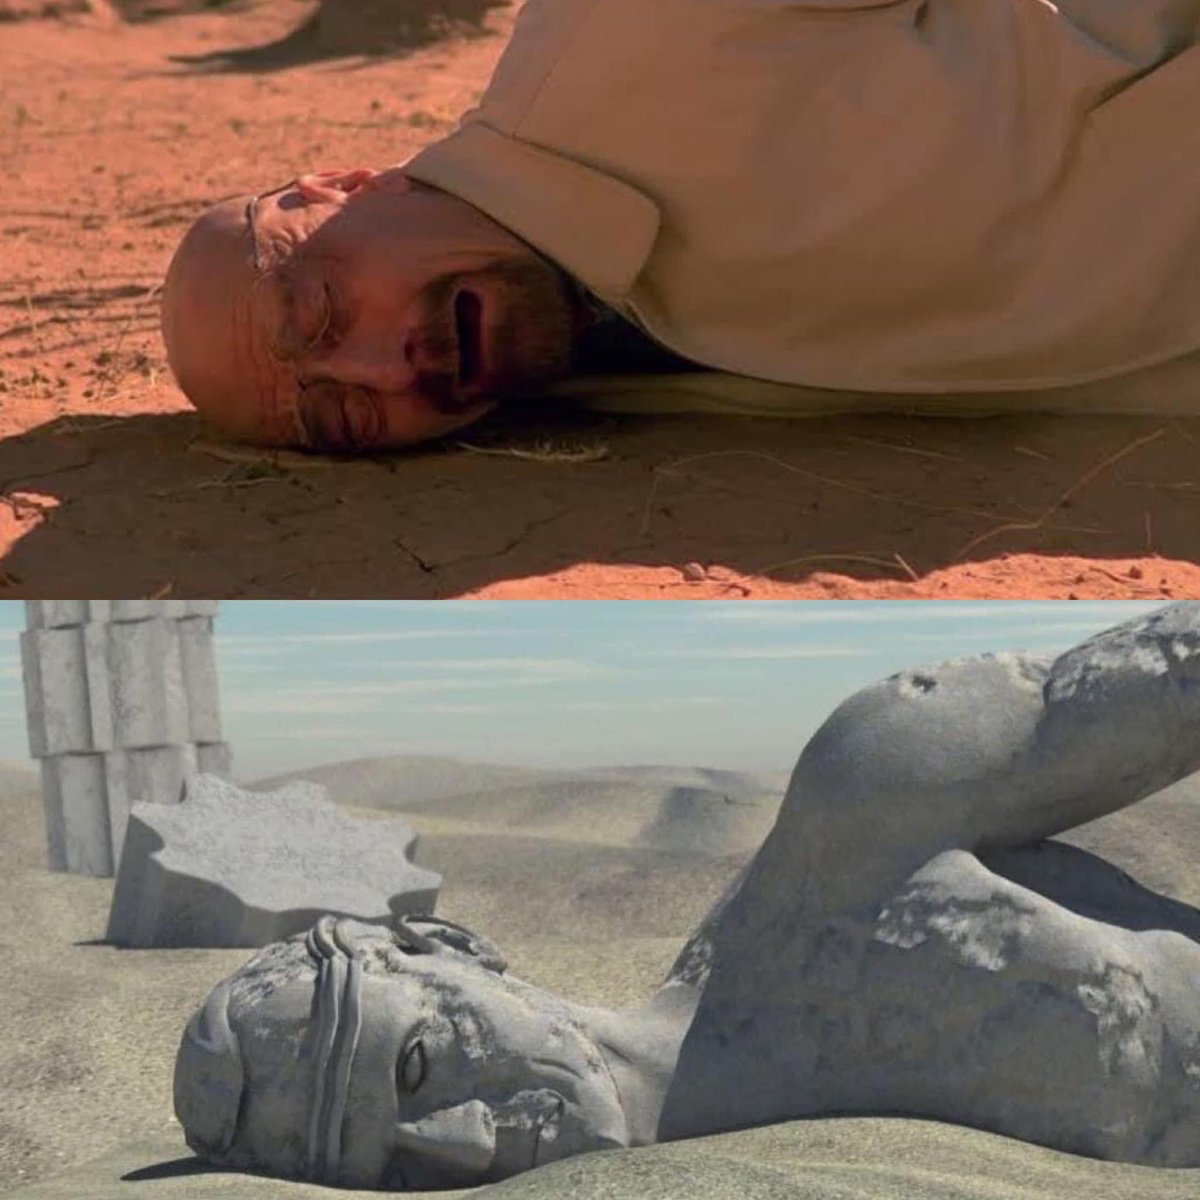 The episode of Breaking Bad, 'Ozymandias' is considered the best episode in the history of television. The word is known from Percy Shelley's poem, published in 1818, which uses the image of a statue of Ozymandias to describe the inevitable decline of all leaders and empires no…